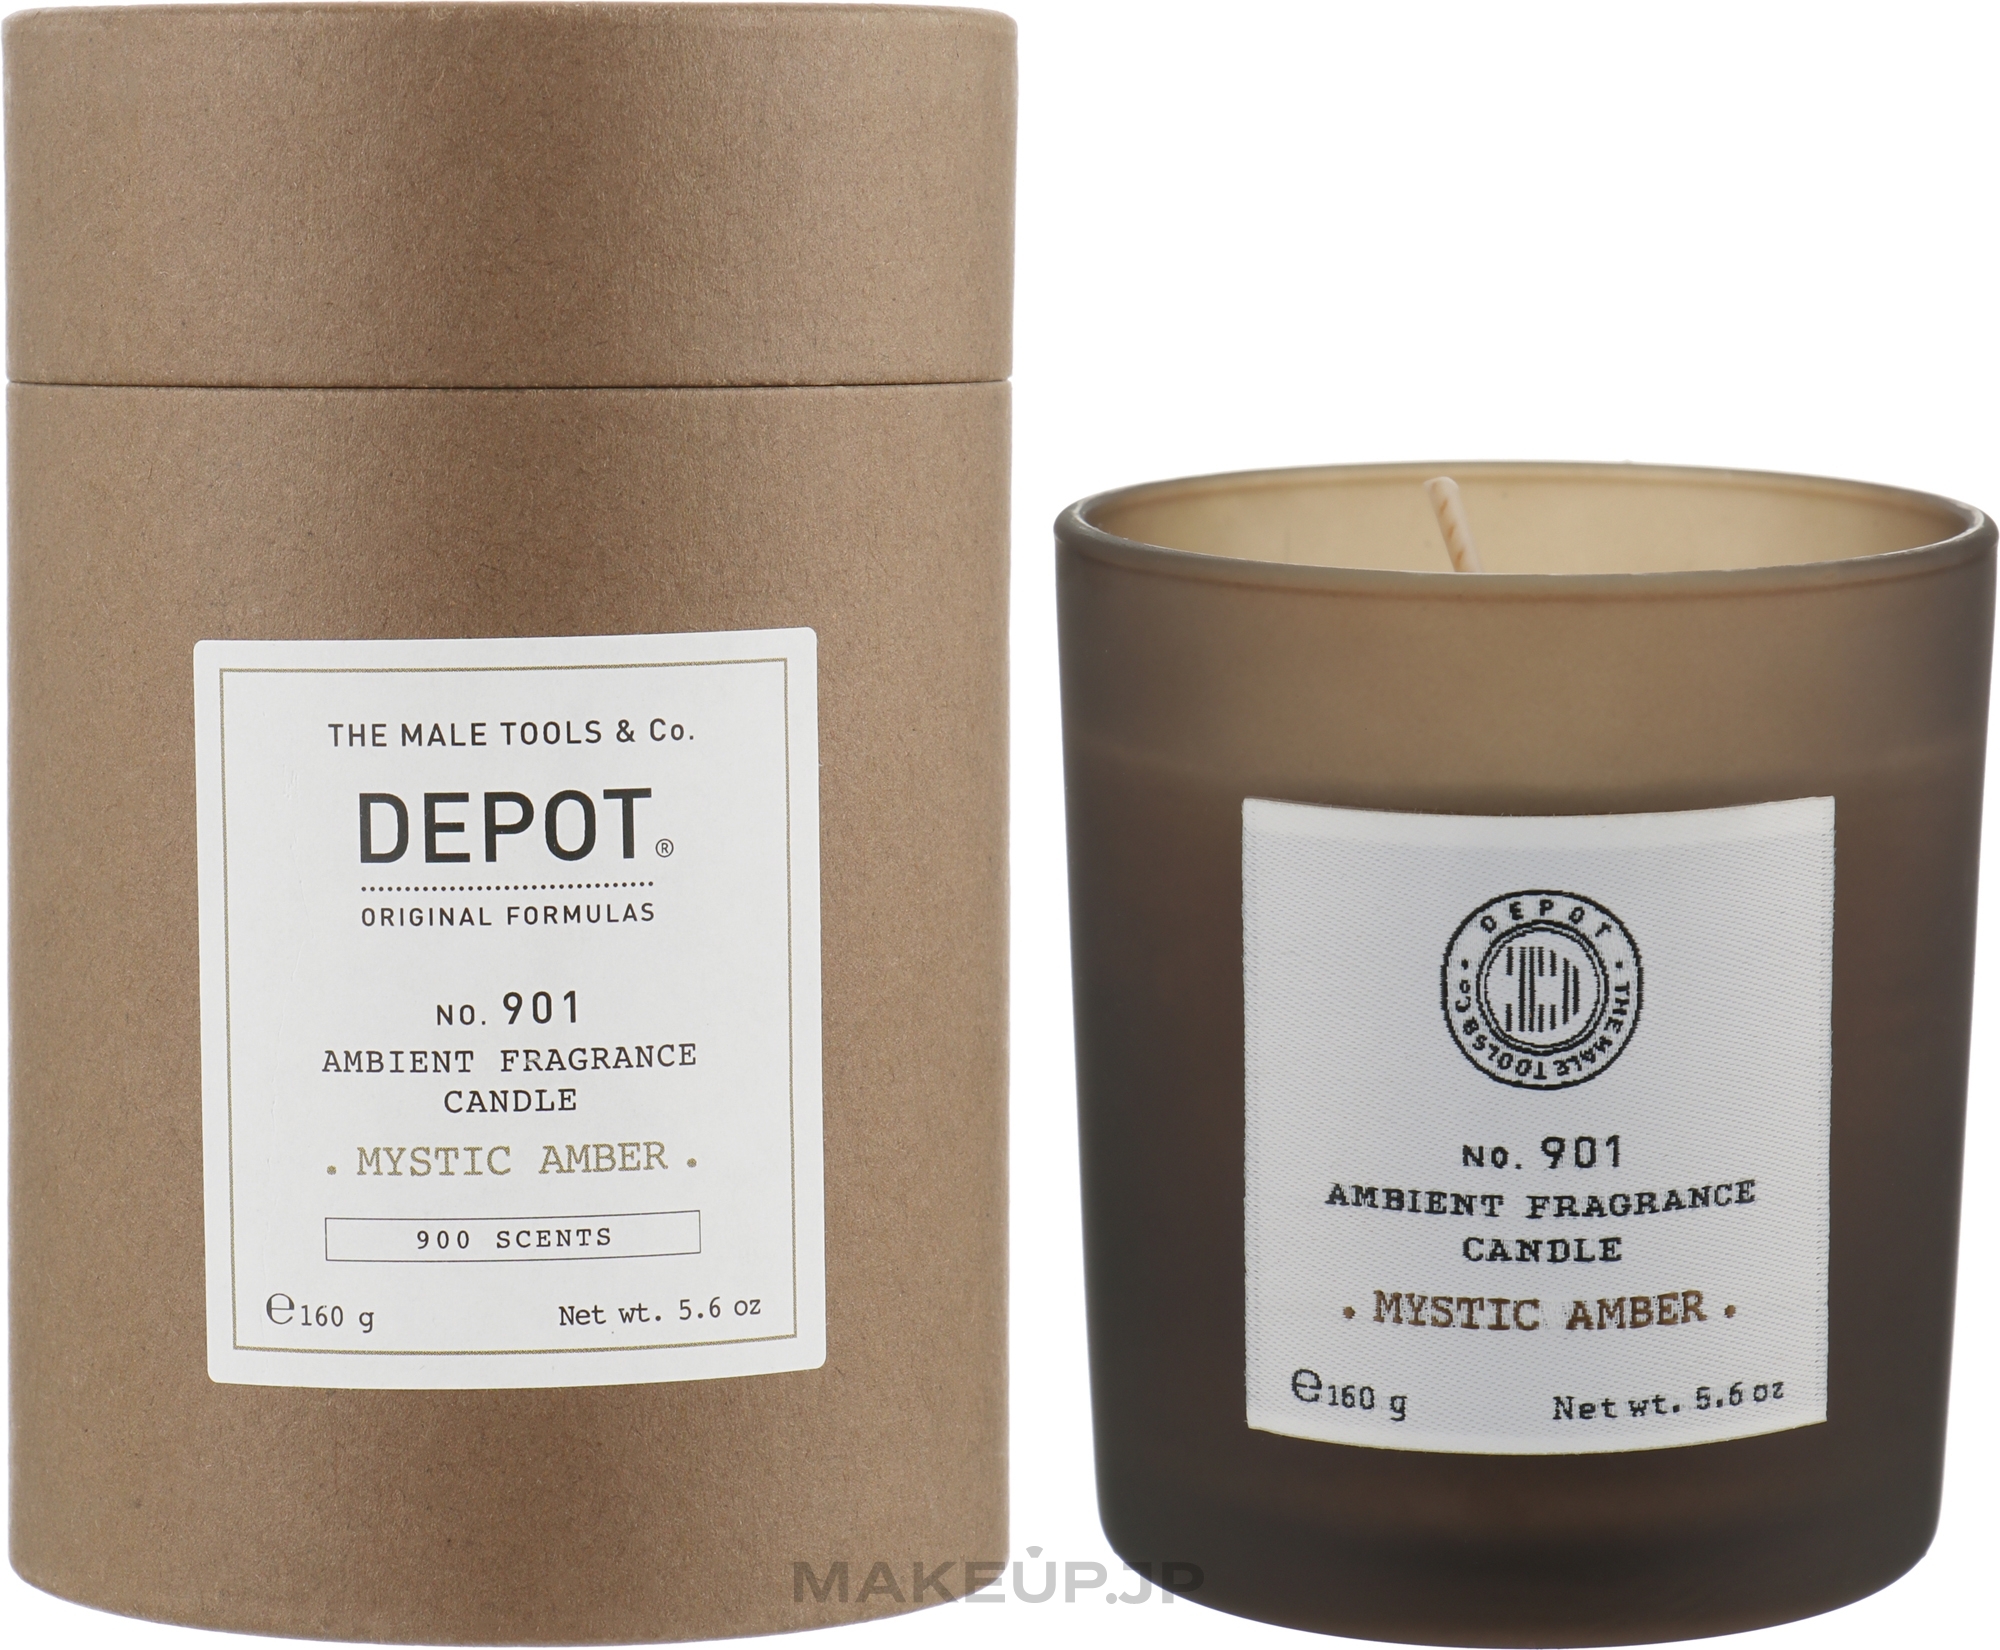 Scented Candle 'Mystical Amber' - Depot 901 Ambient Fragrance Candle Mystic Amber — photo 160 g